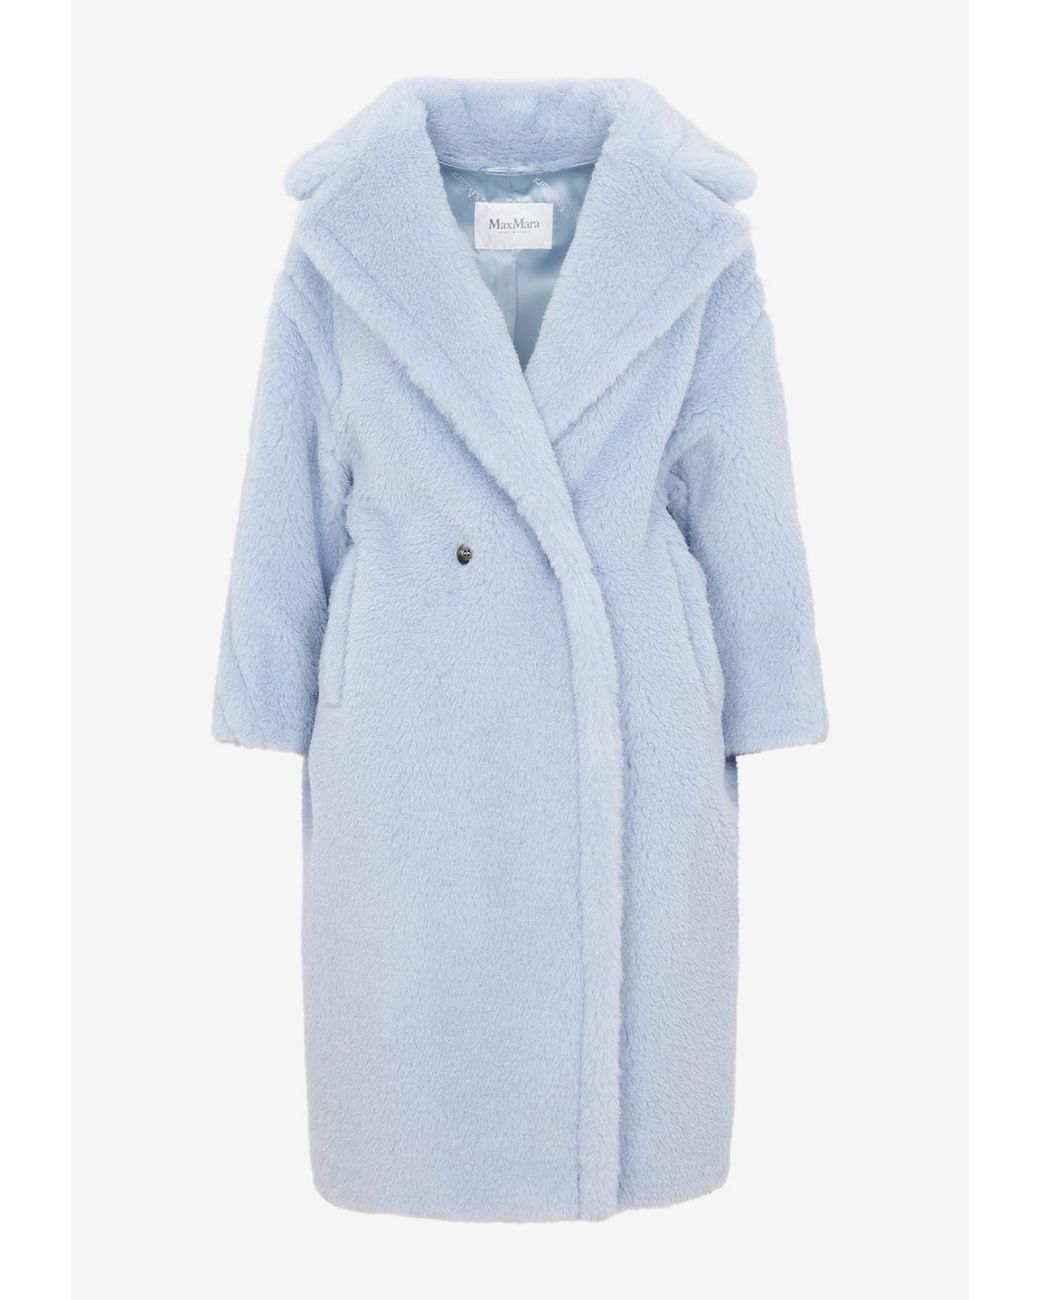 Max Mara Tedgirl Double-breasted Fur Coat in Blue | Lyst